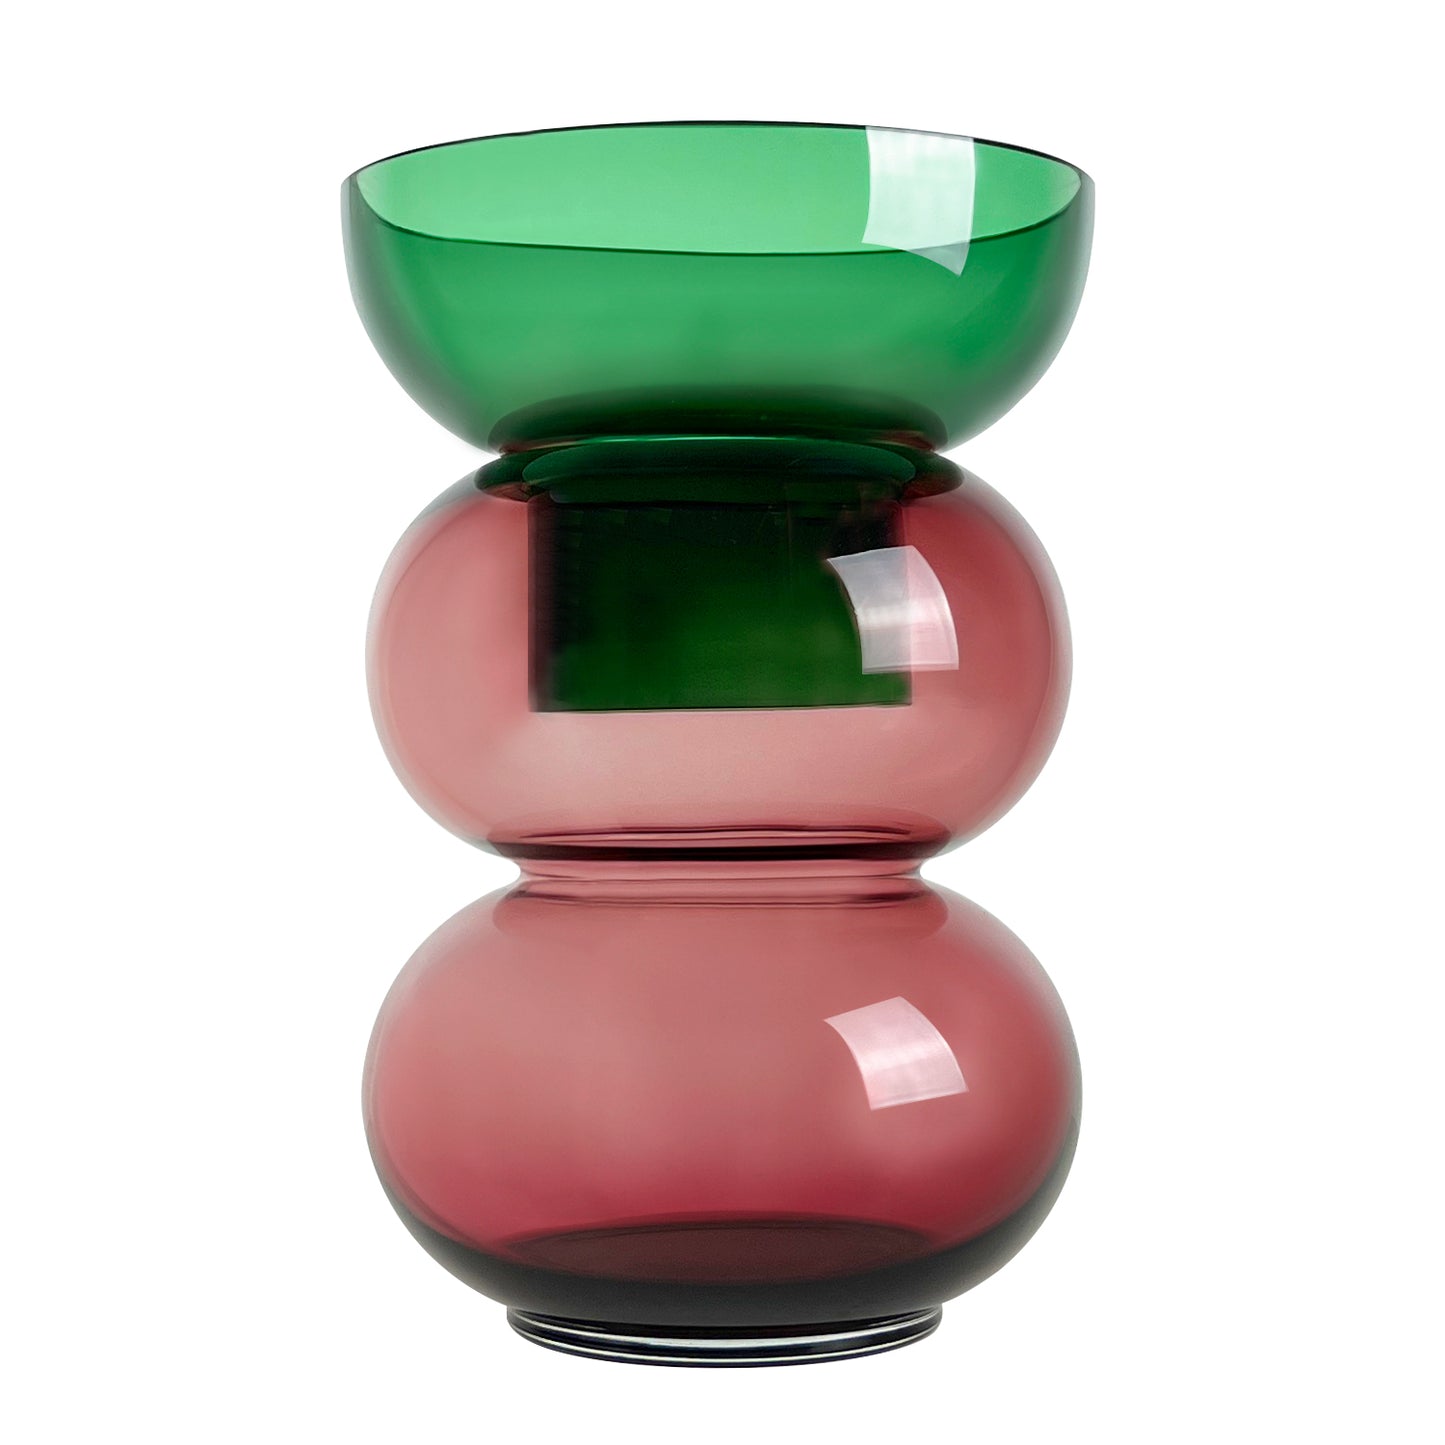 Cloudnola Luxurious Bubble Vase XL in Green and Pink